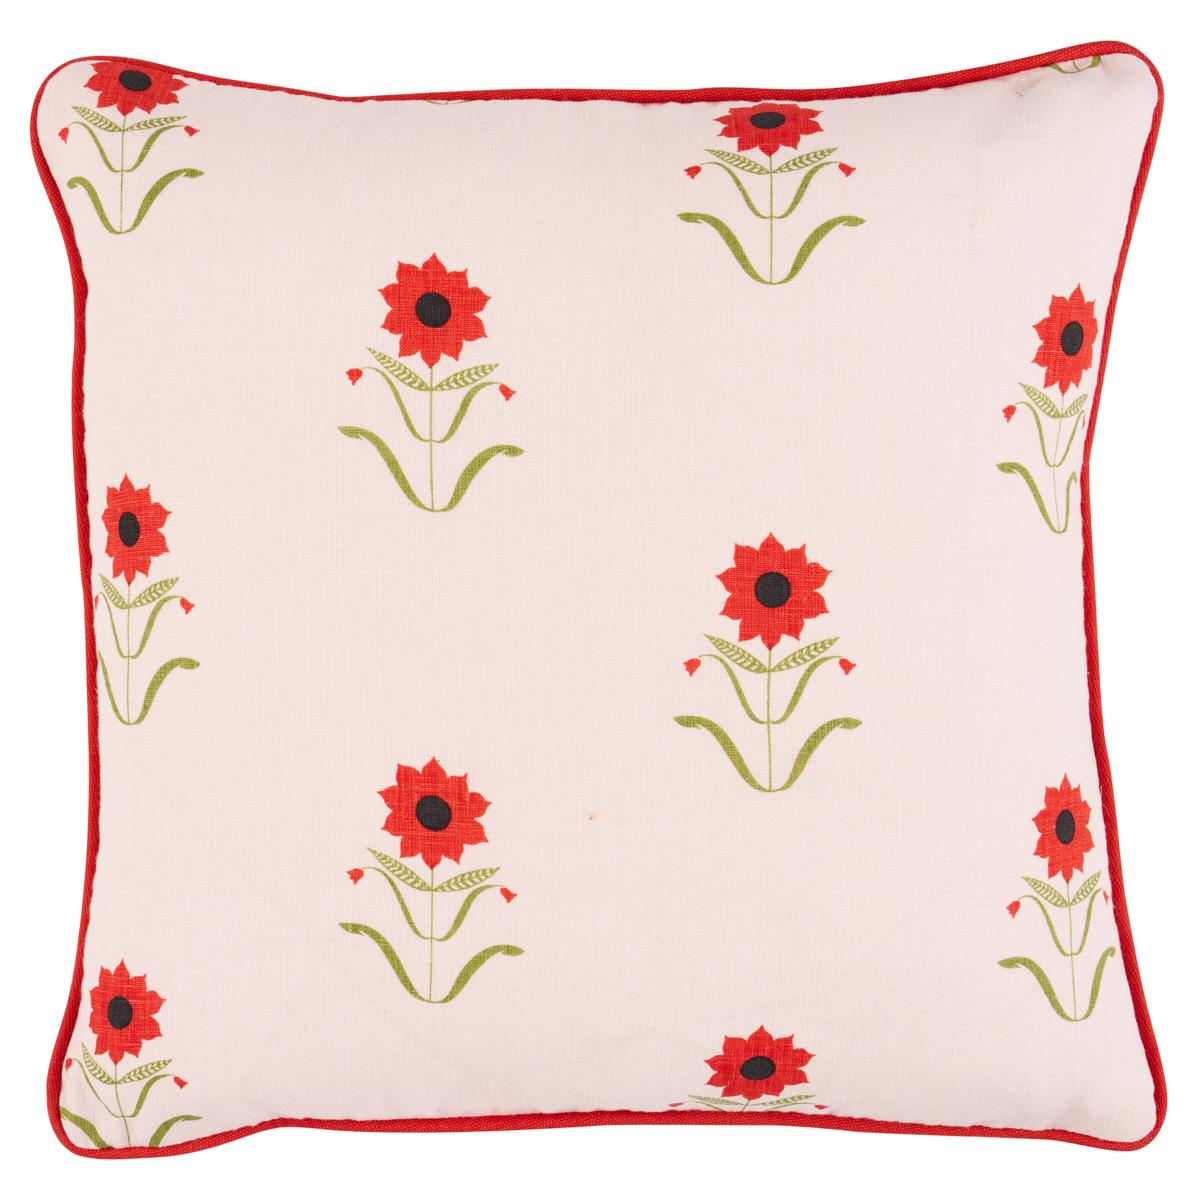 Forget Me Nots Pillow in Red on Pink 16 x 16"